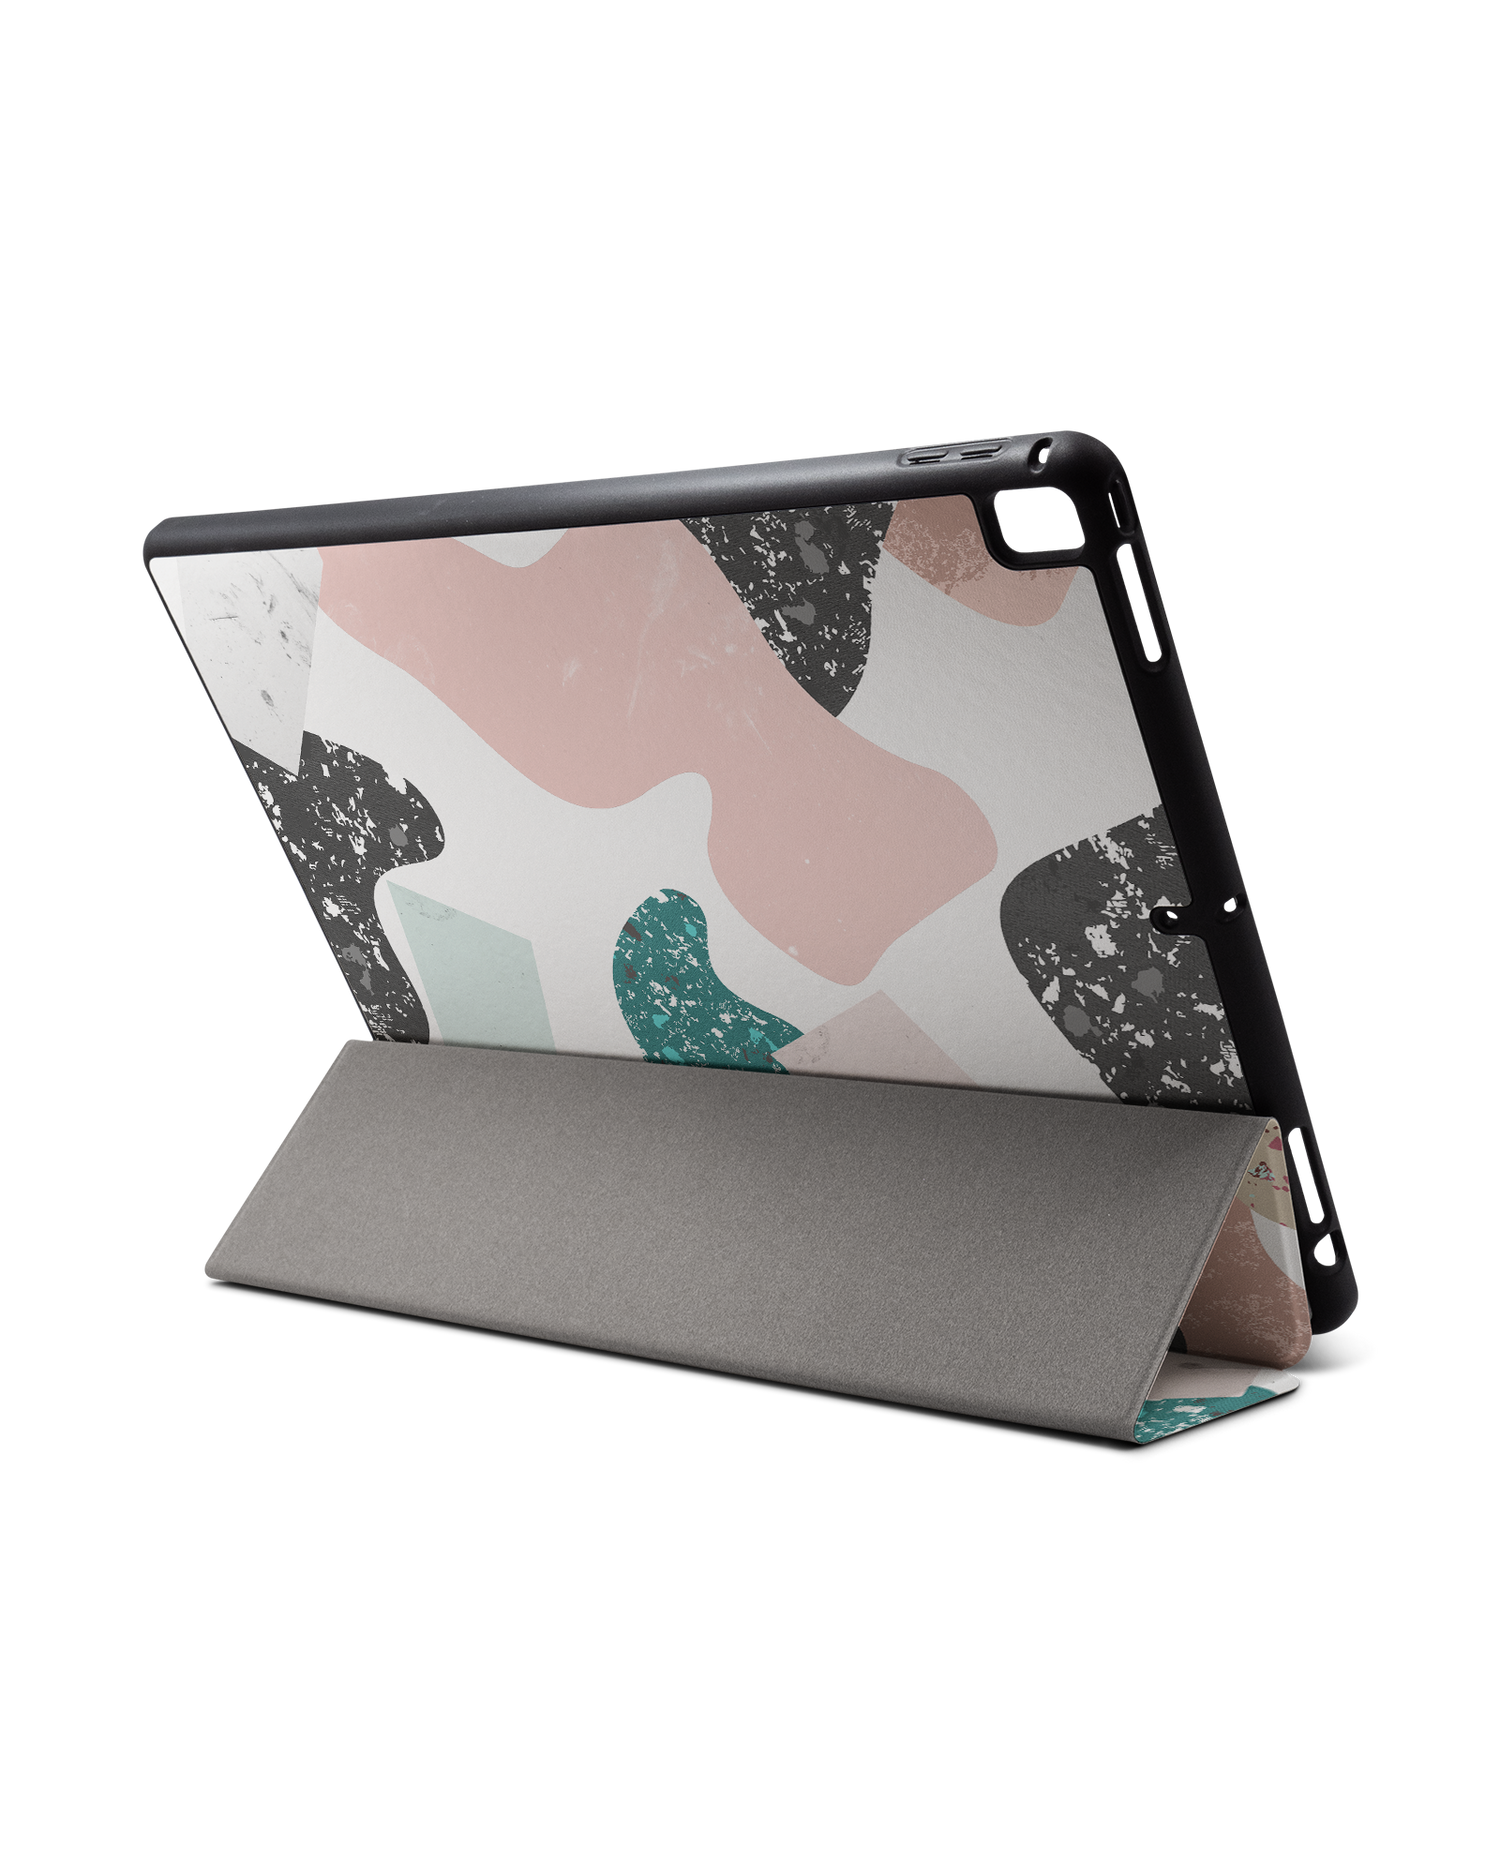 Scattered Shapes iPad Case with Pencil Holder for Apple iPad Pro 2 12.9